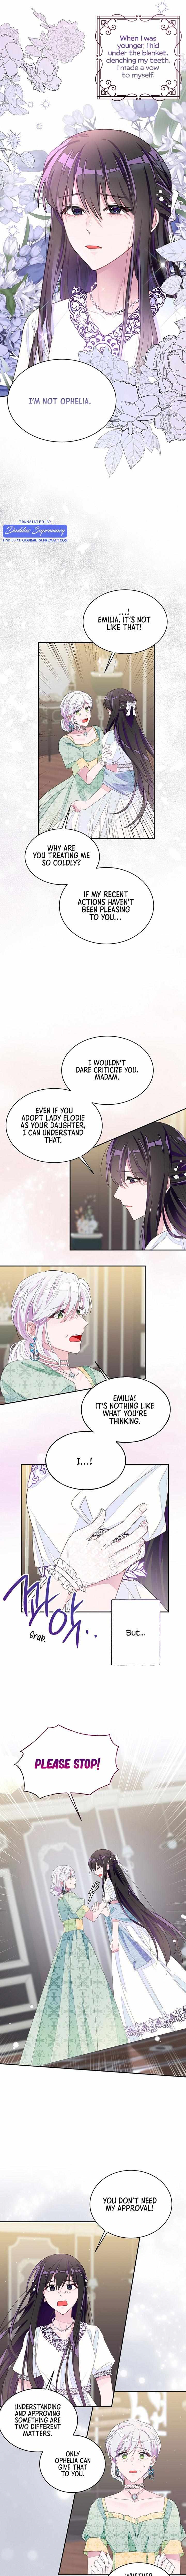 The Bad Ending Of The Otome Game - 31 page 6-347f7563